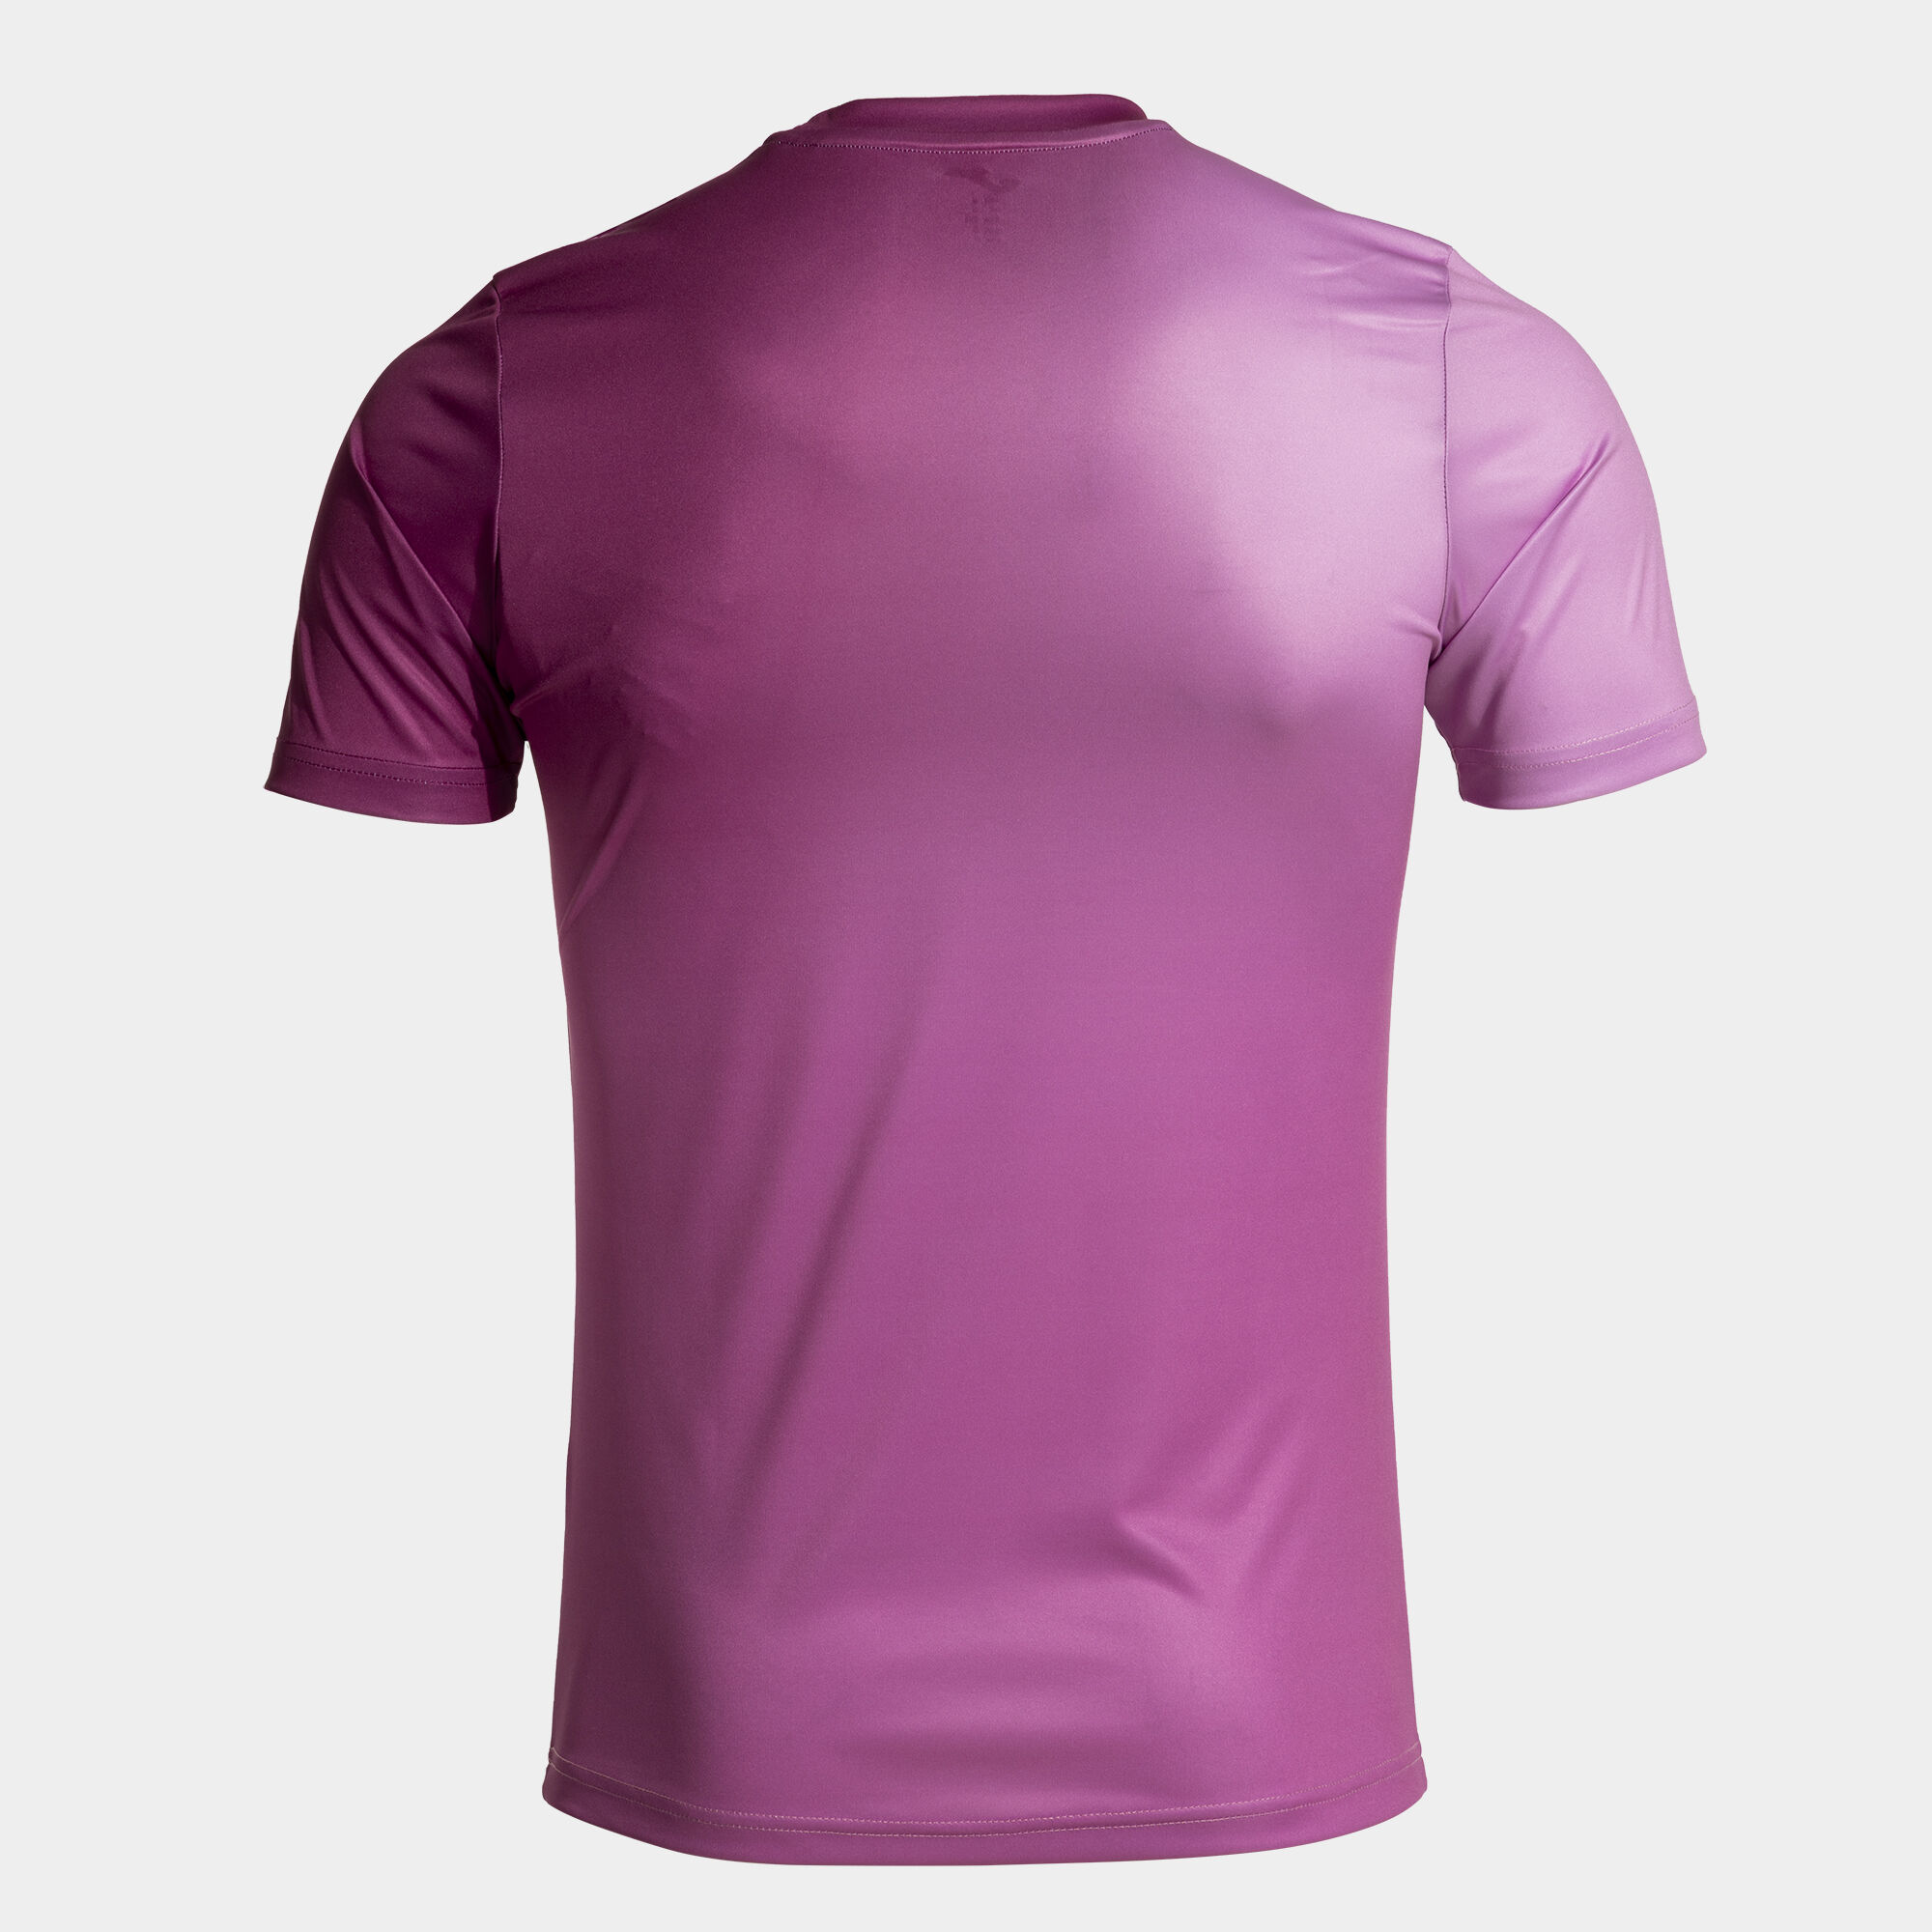 Maillot manches courtes homme Pro team rose fuchsia